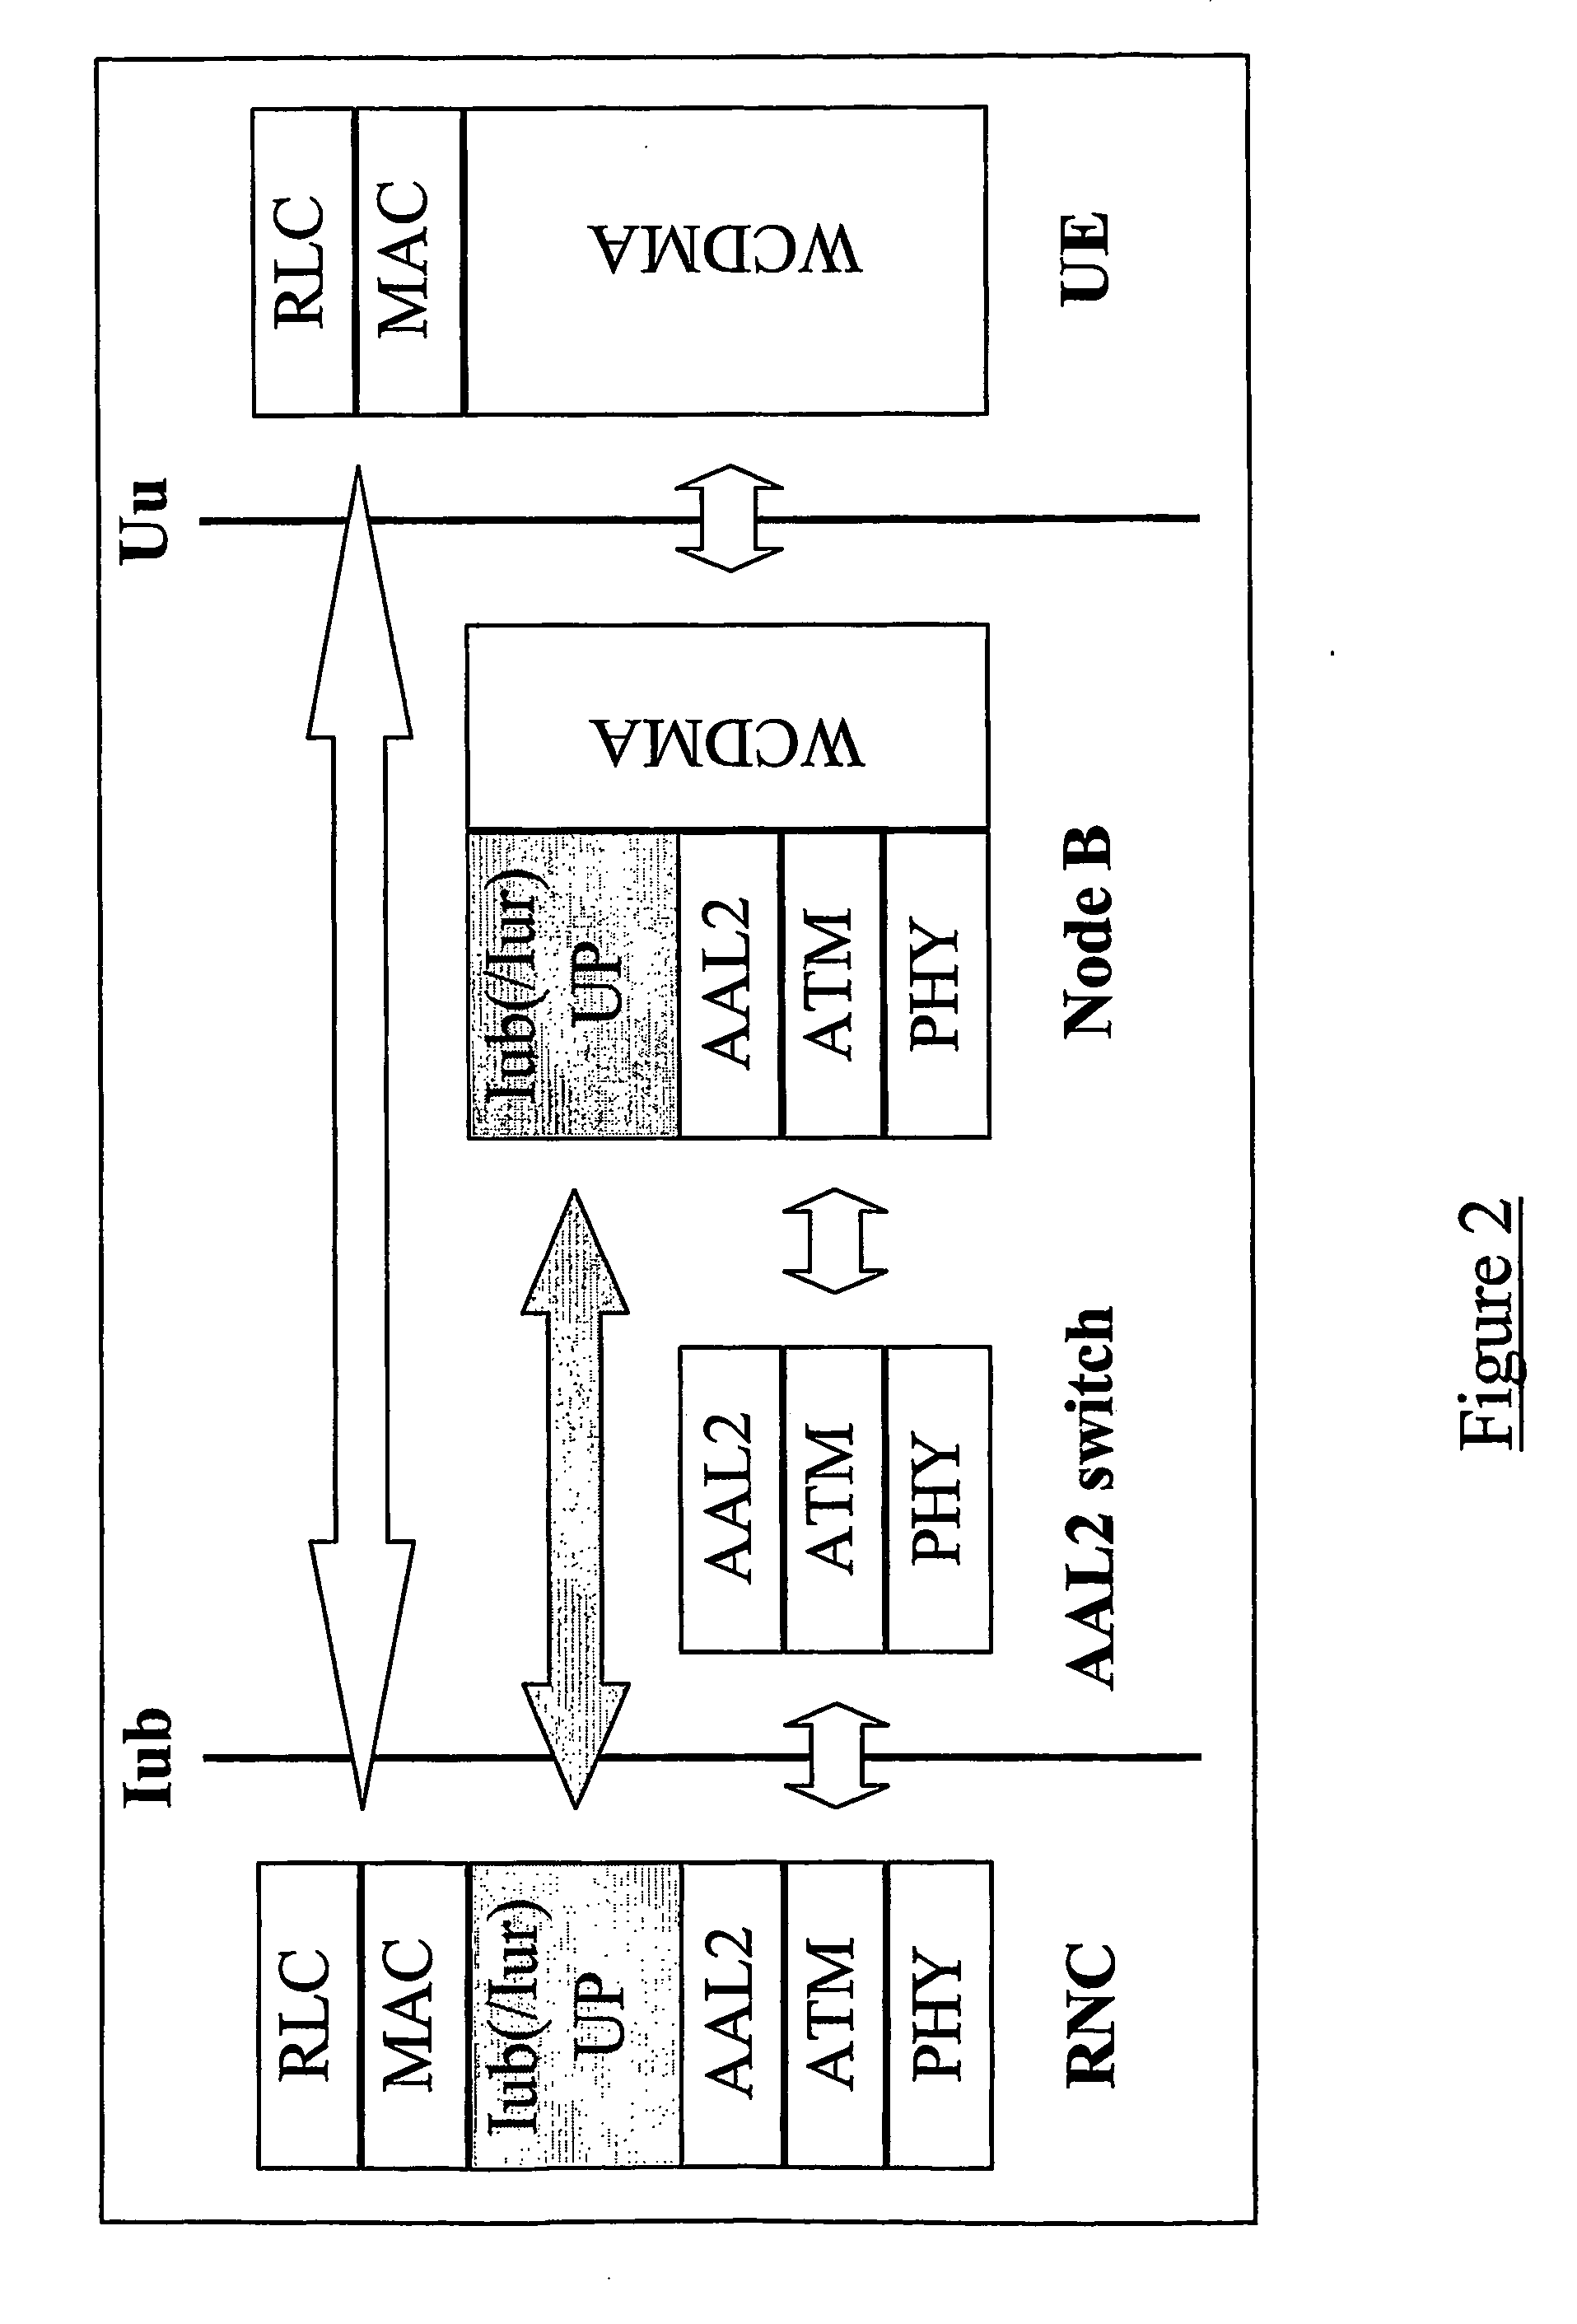 Frame synchronisation in a radio access network